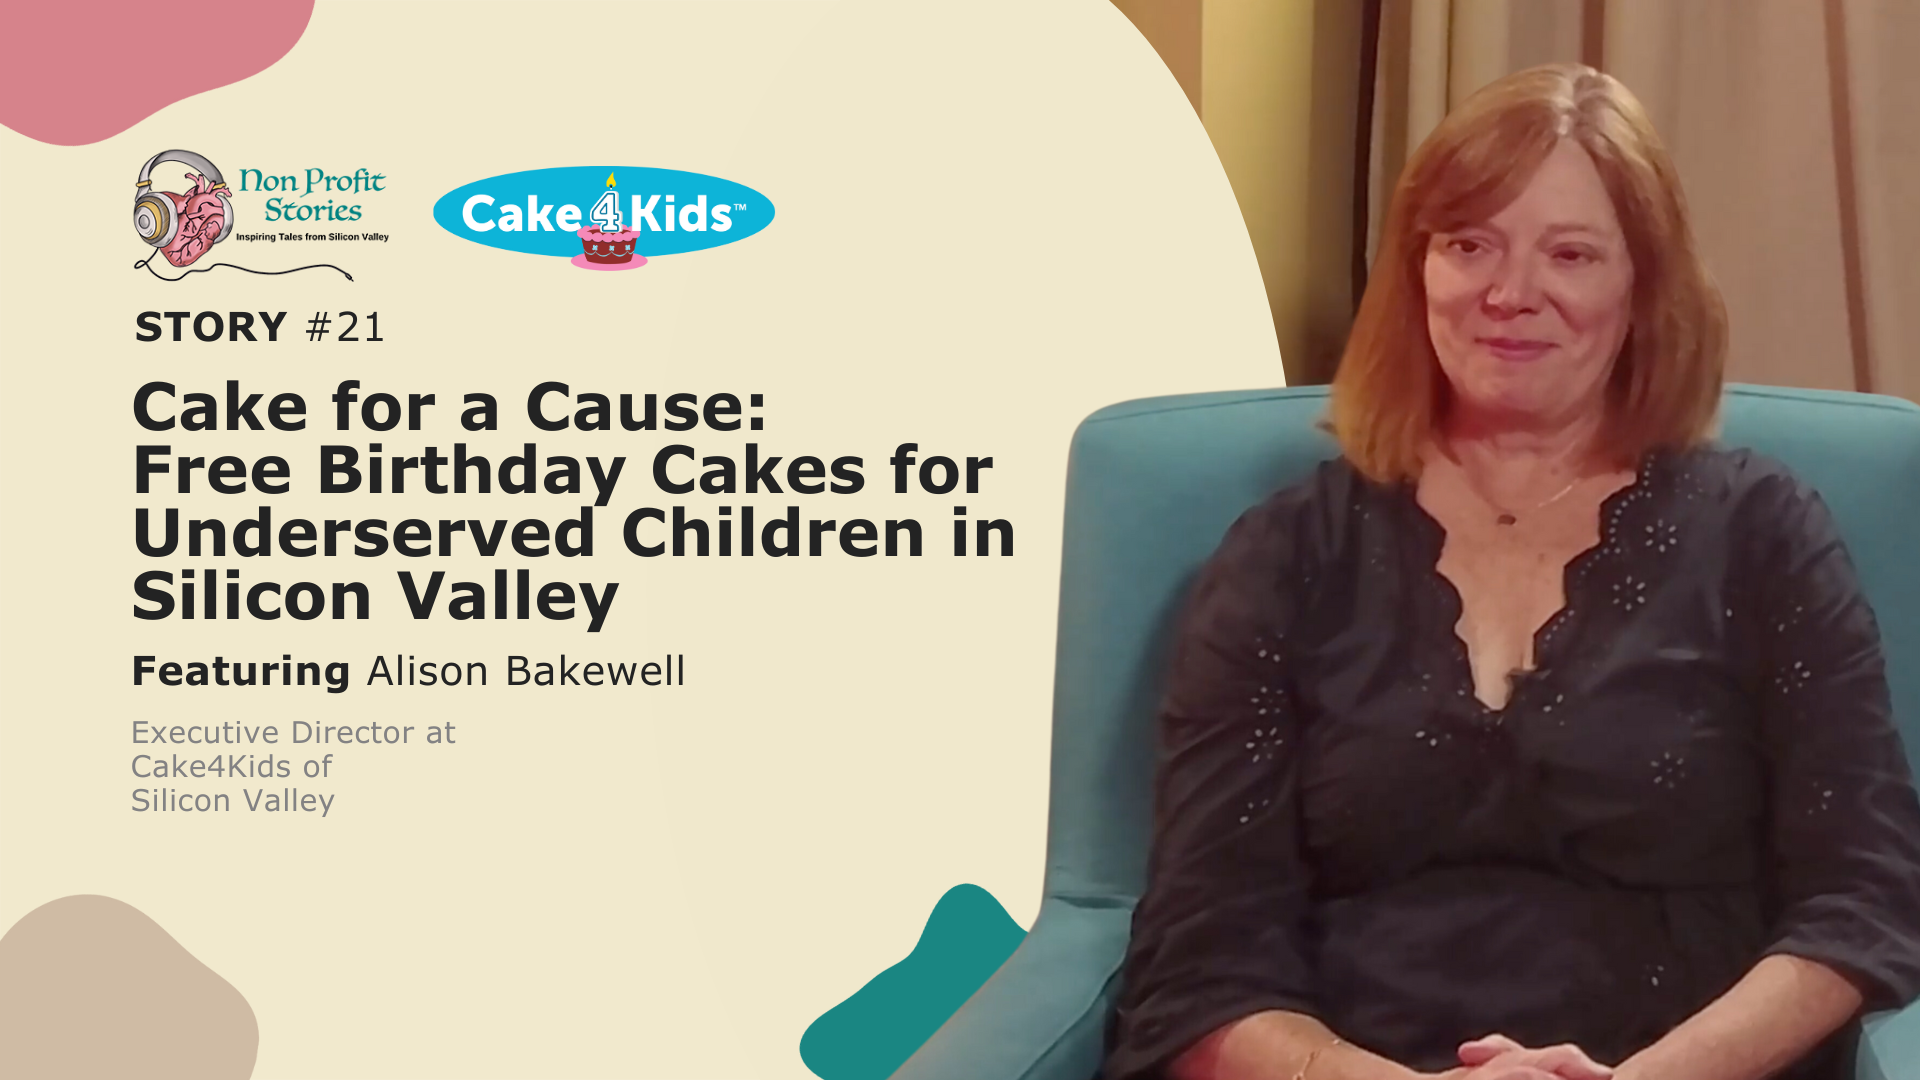 Cake for a Cause: Free Birthday Cakes for Underserved Children in Silicon Valley